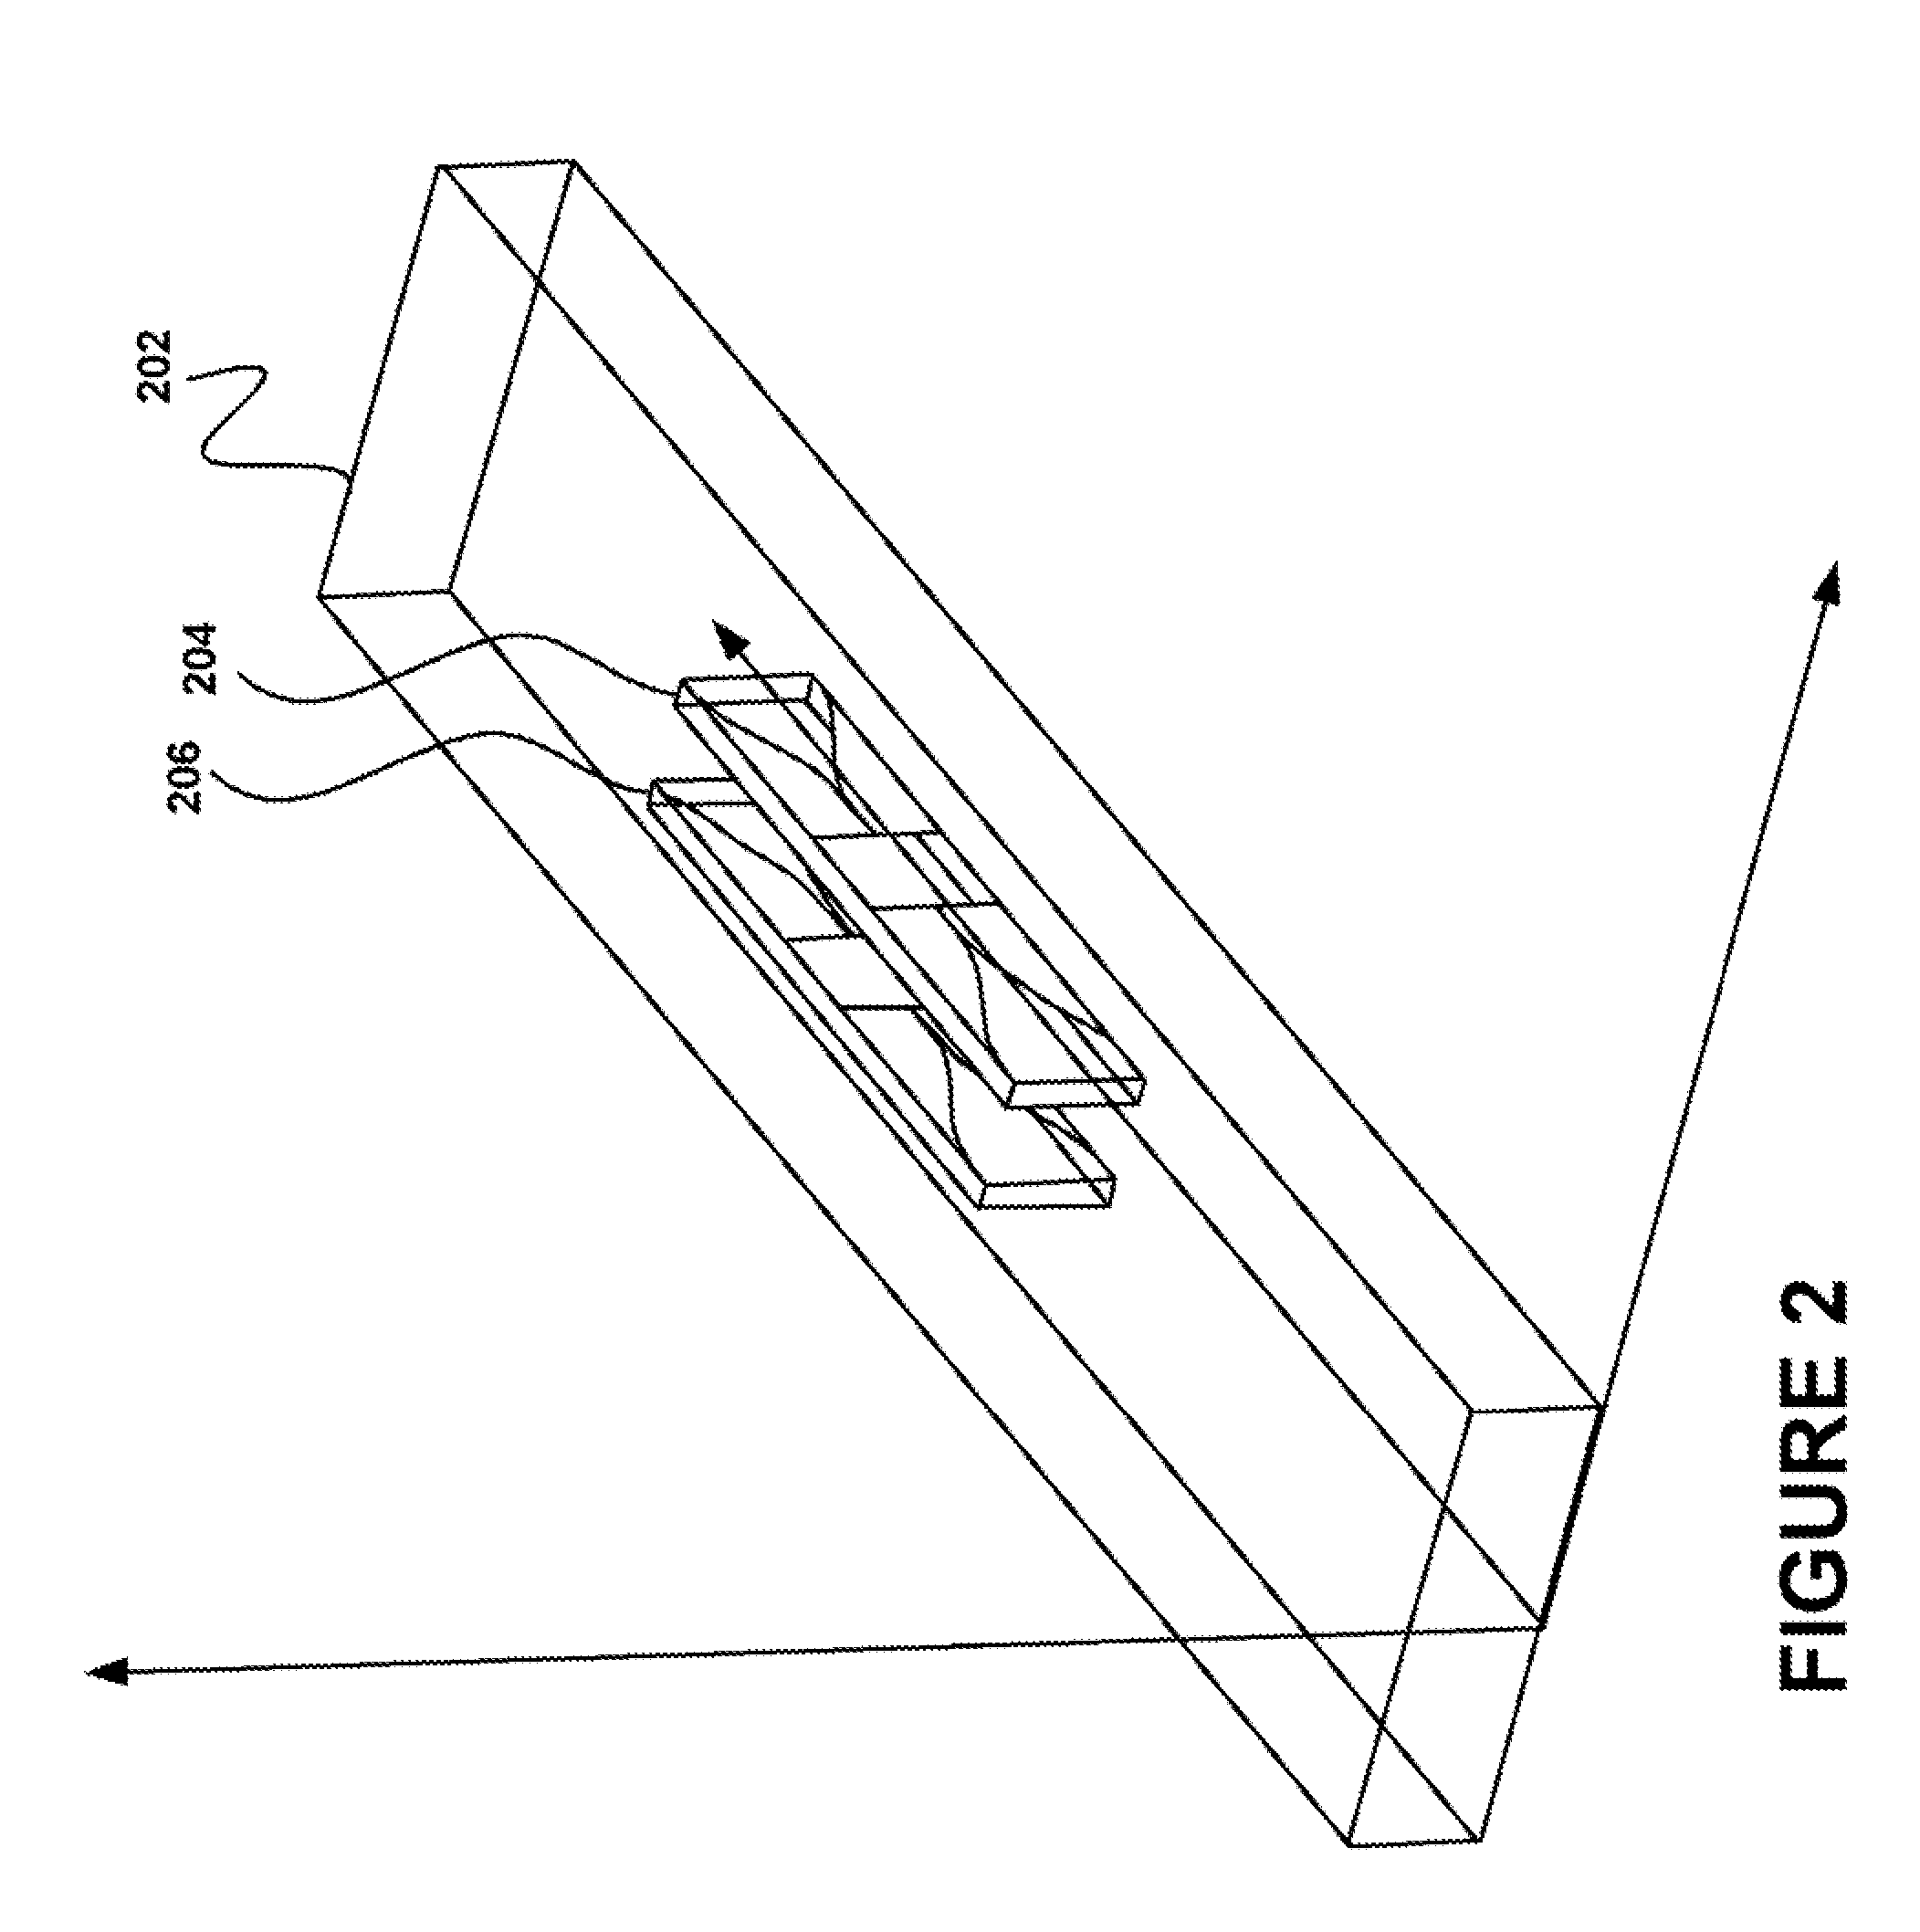 Waveguide apparatus with integrated amplifier and associated transitions